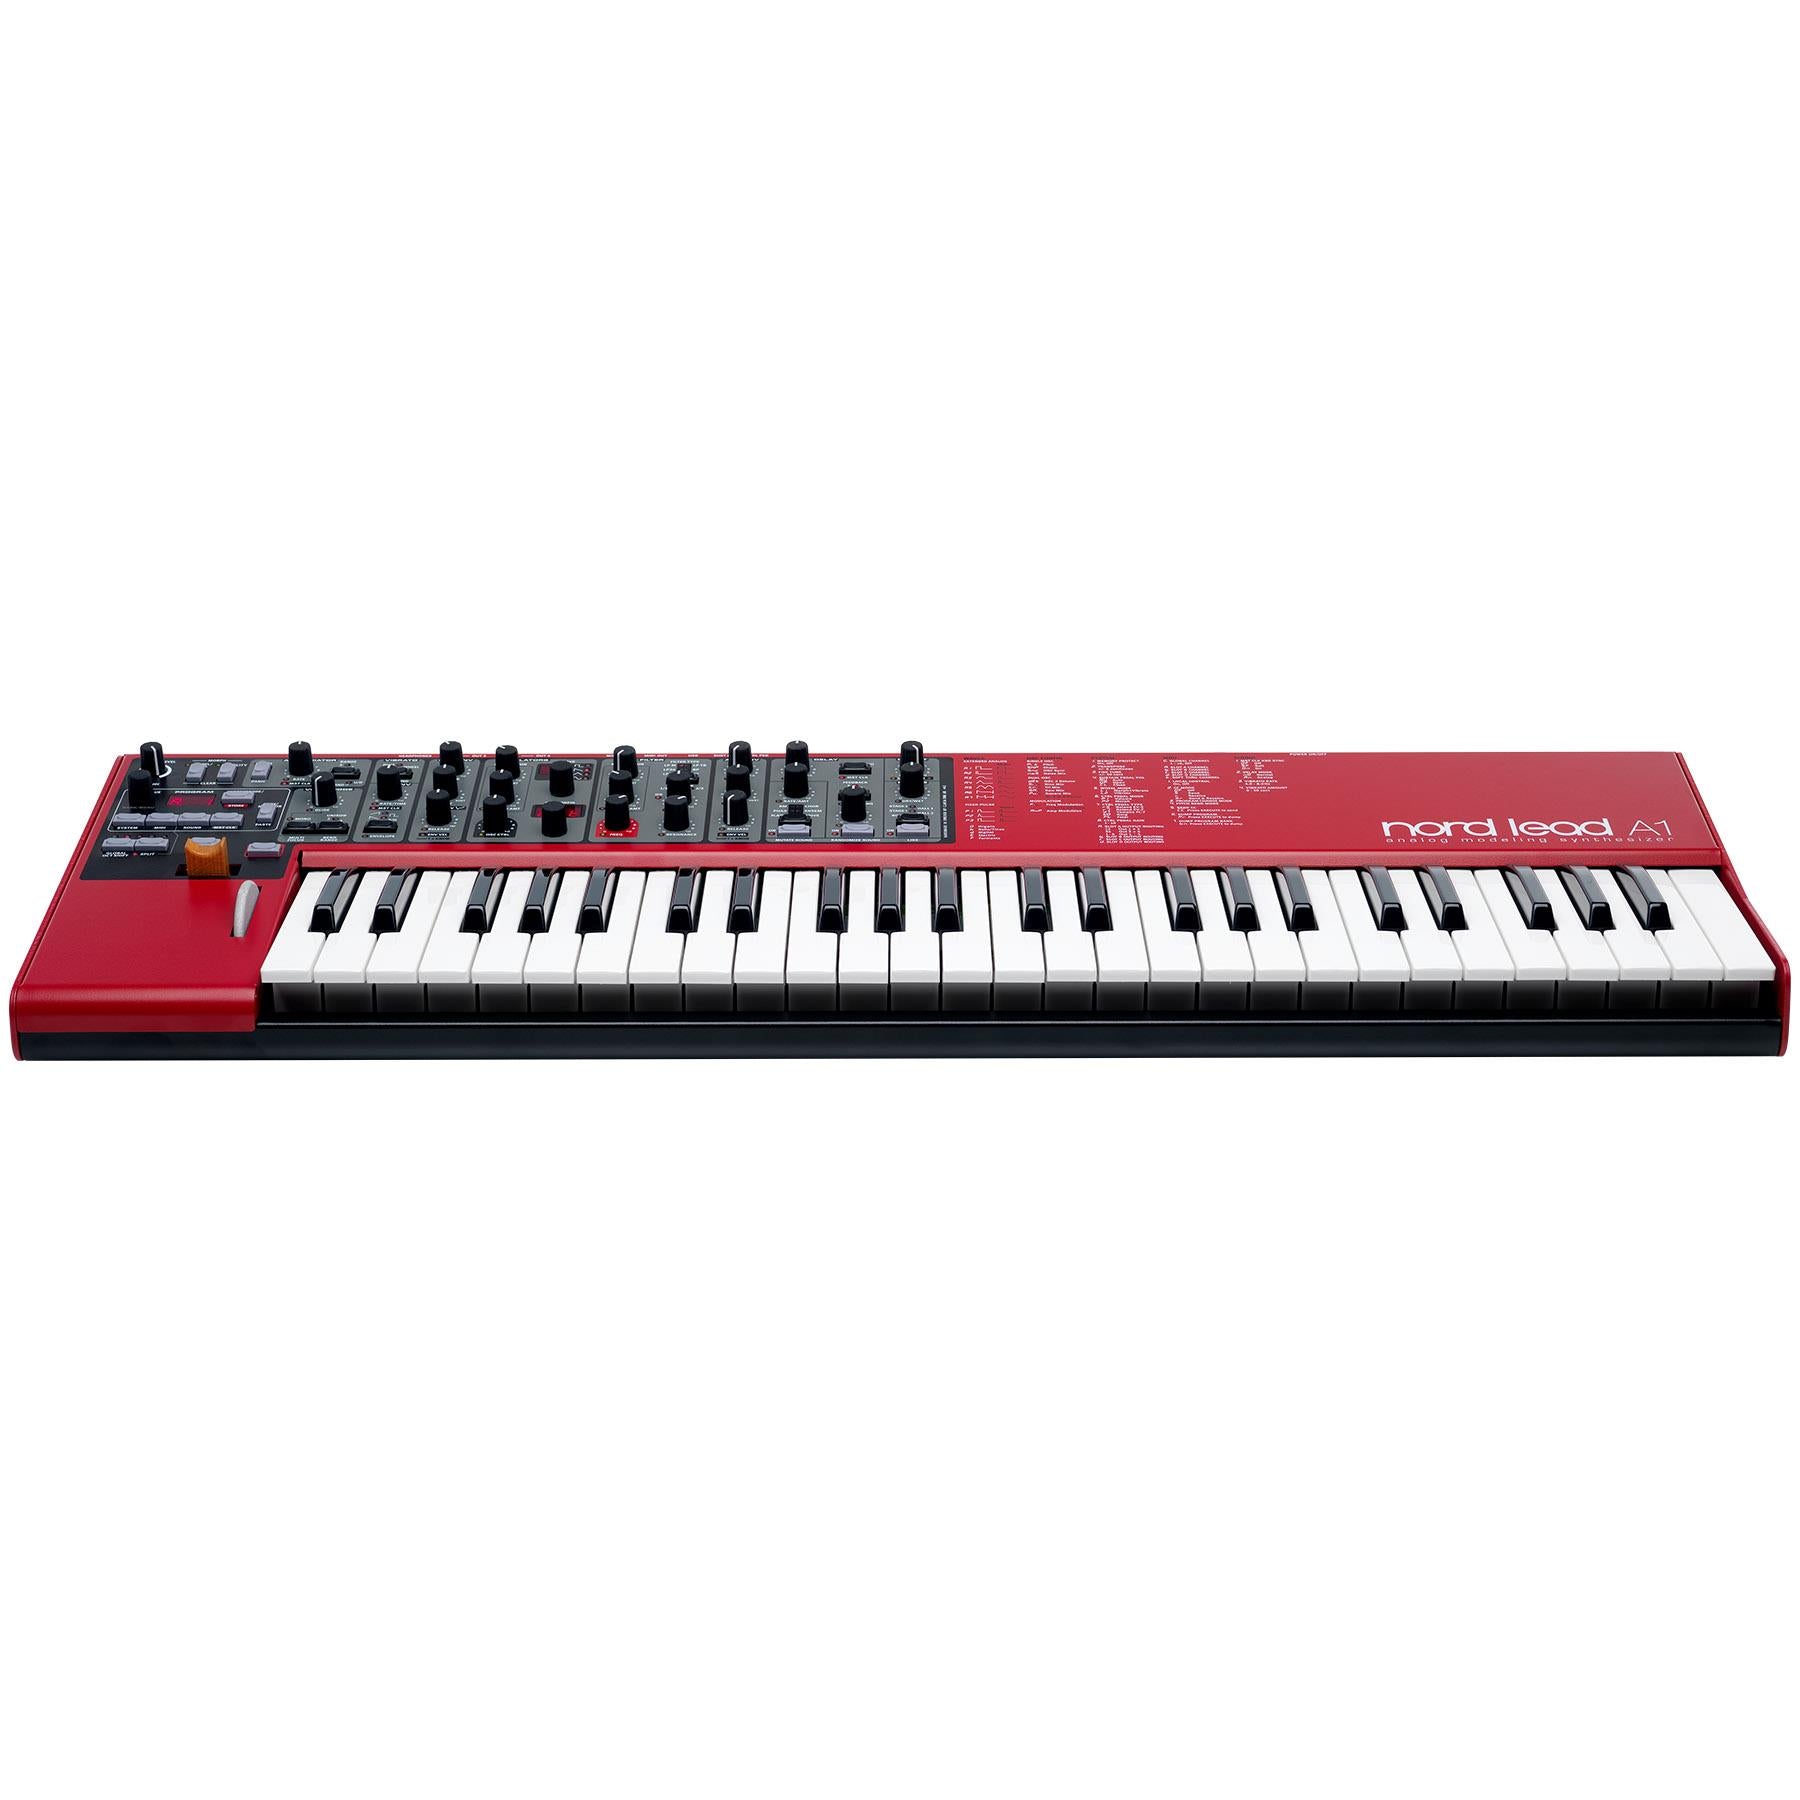 NEW Nord Lead A1 Analog Modeling Synthesizer - LeadA1 A-1 Synth